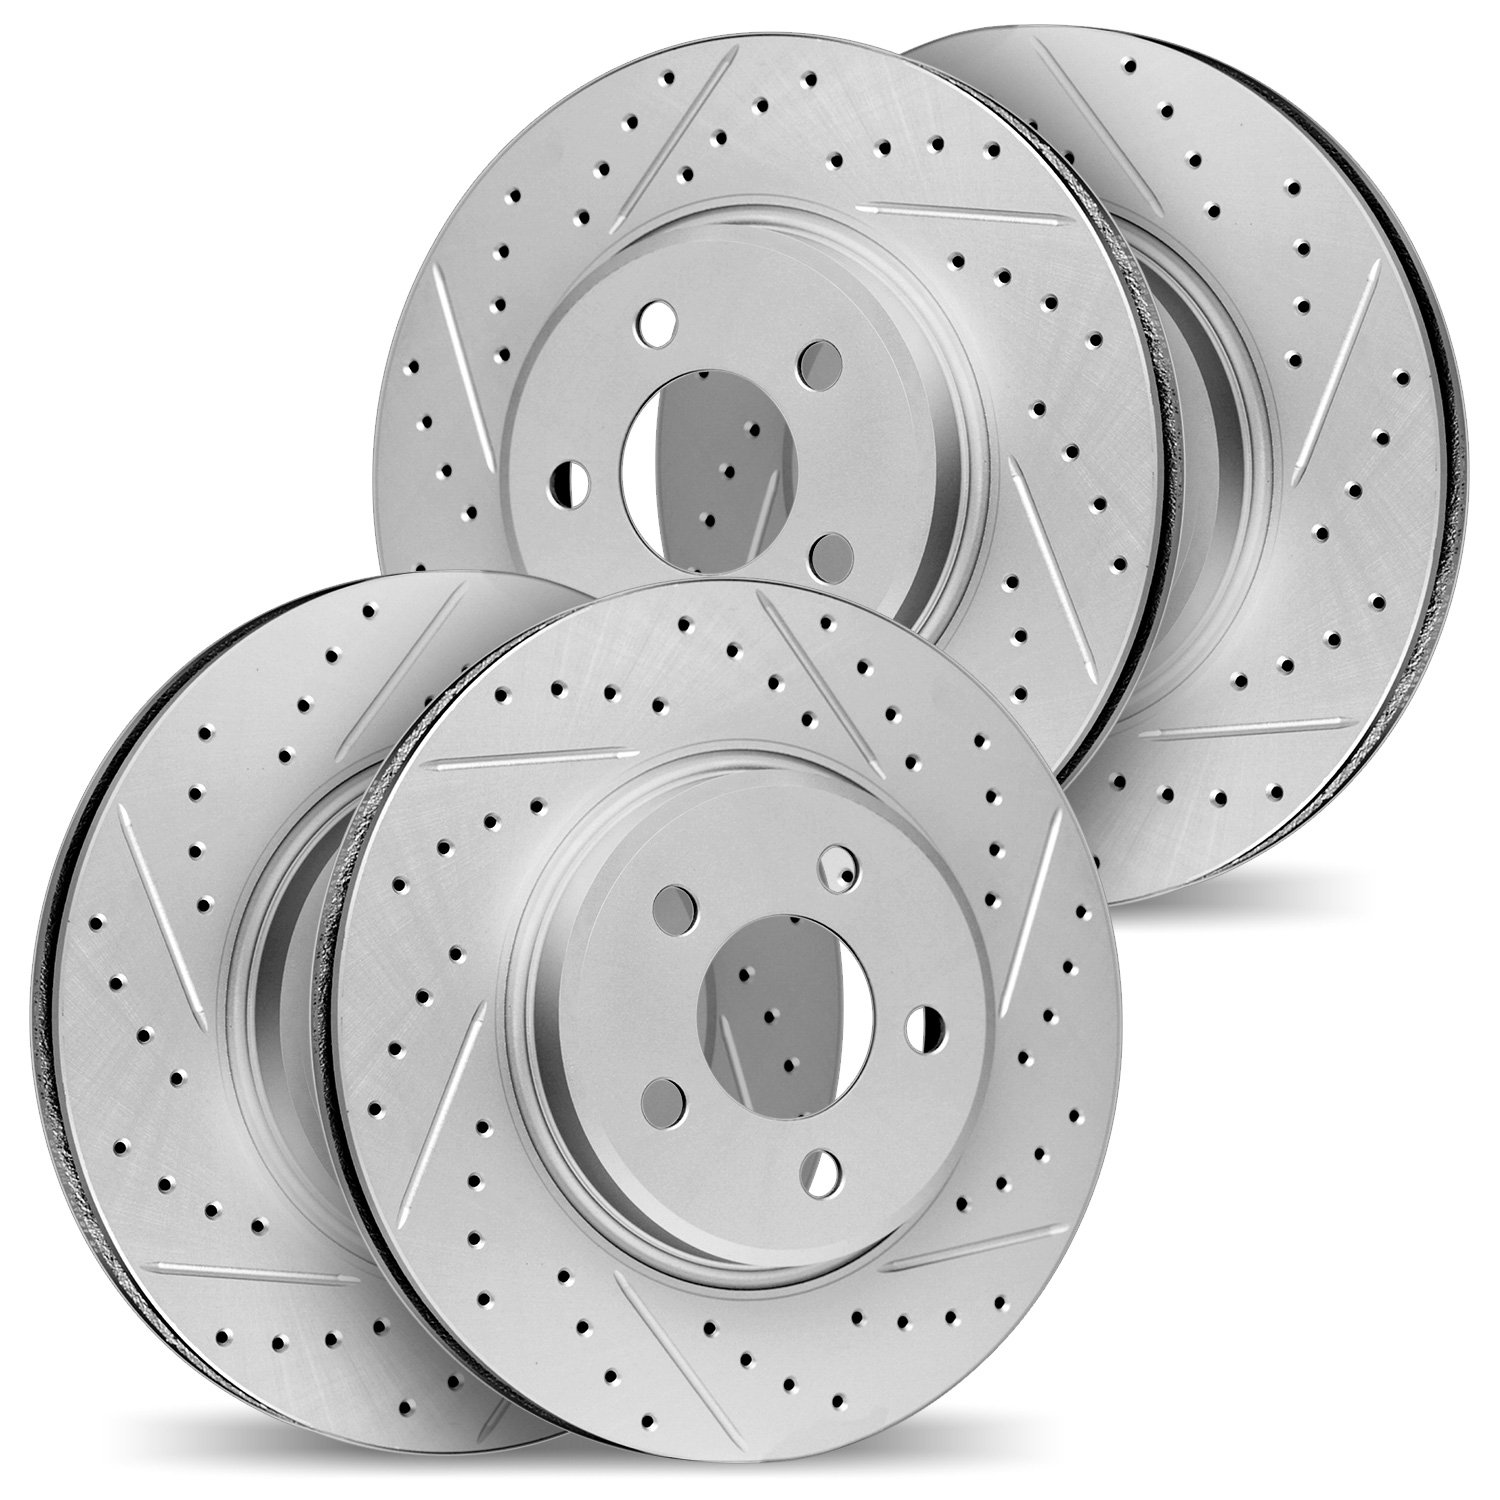 2004-75016 Geoperformance Drilled/Slotted Brake Rotors, Fits Select Lexus/Toyota/Scion, Position: Front and Rear